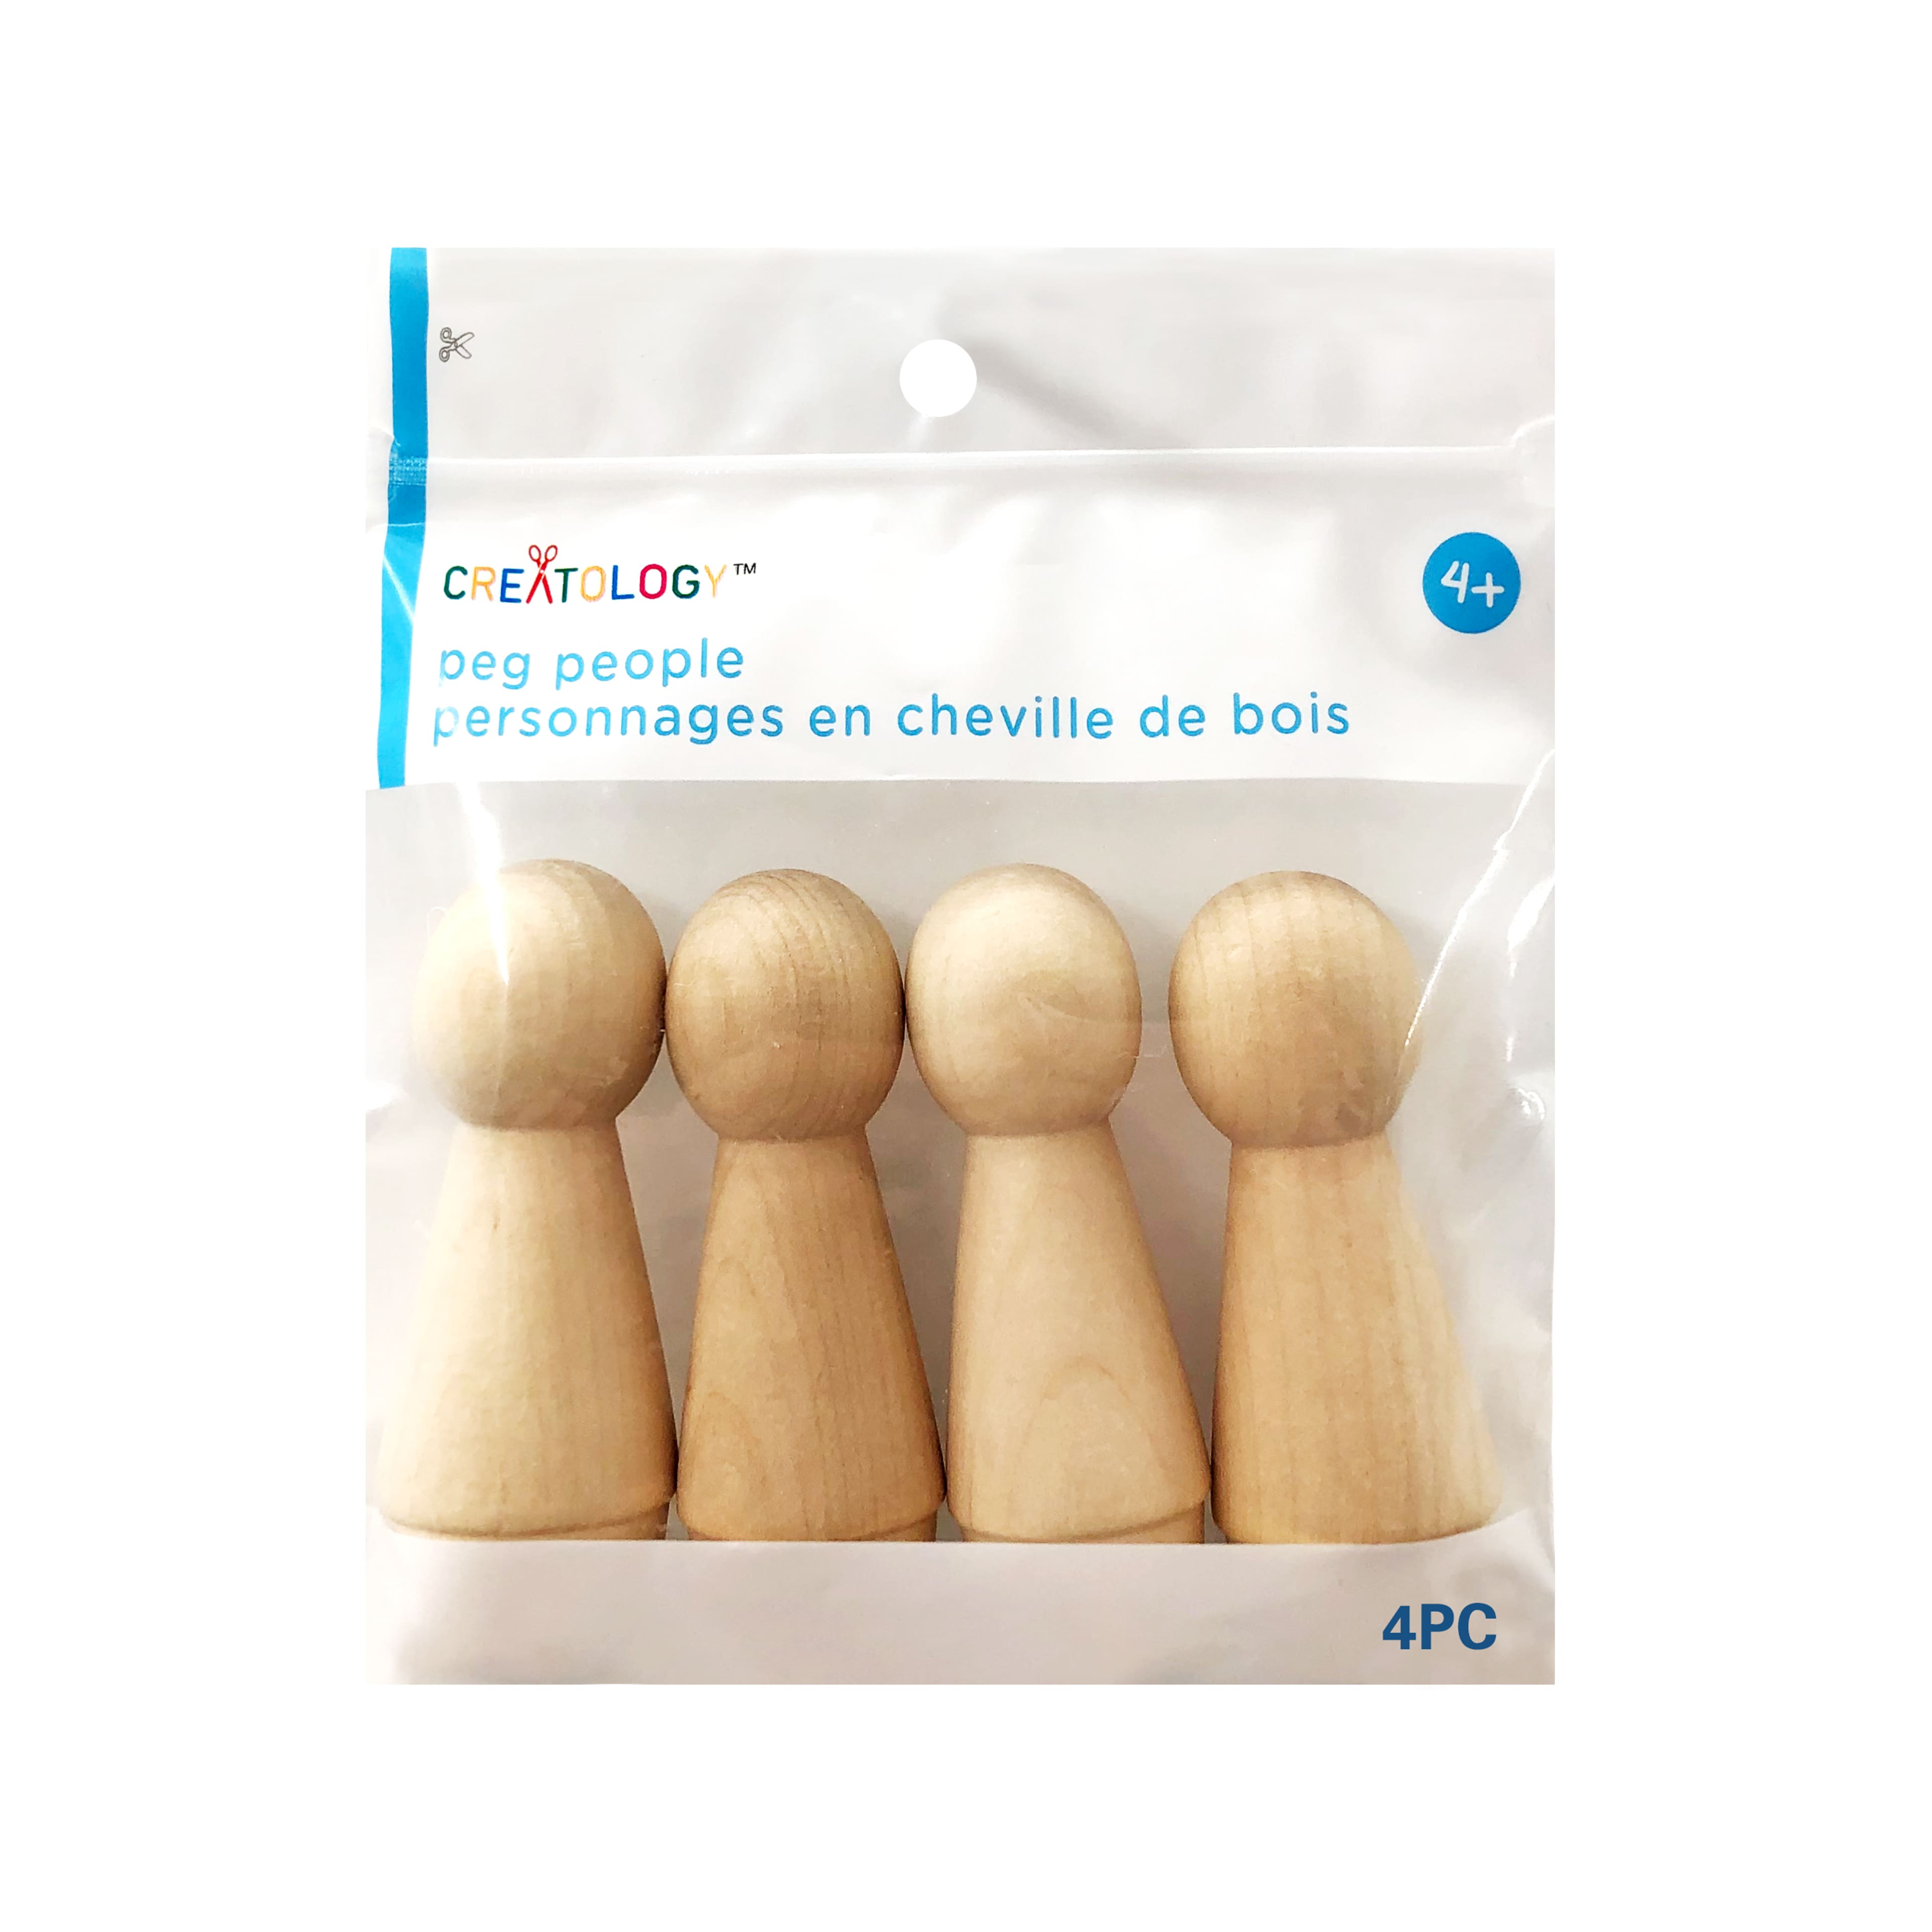 Pepperell Assorted Wooden Shapes, 250ct.